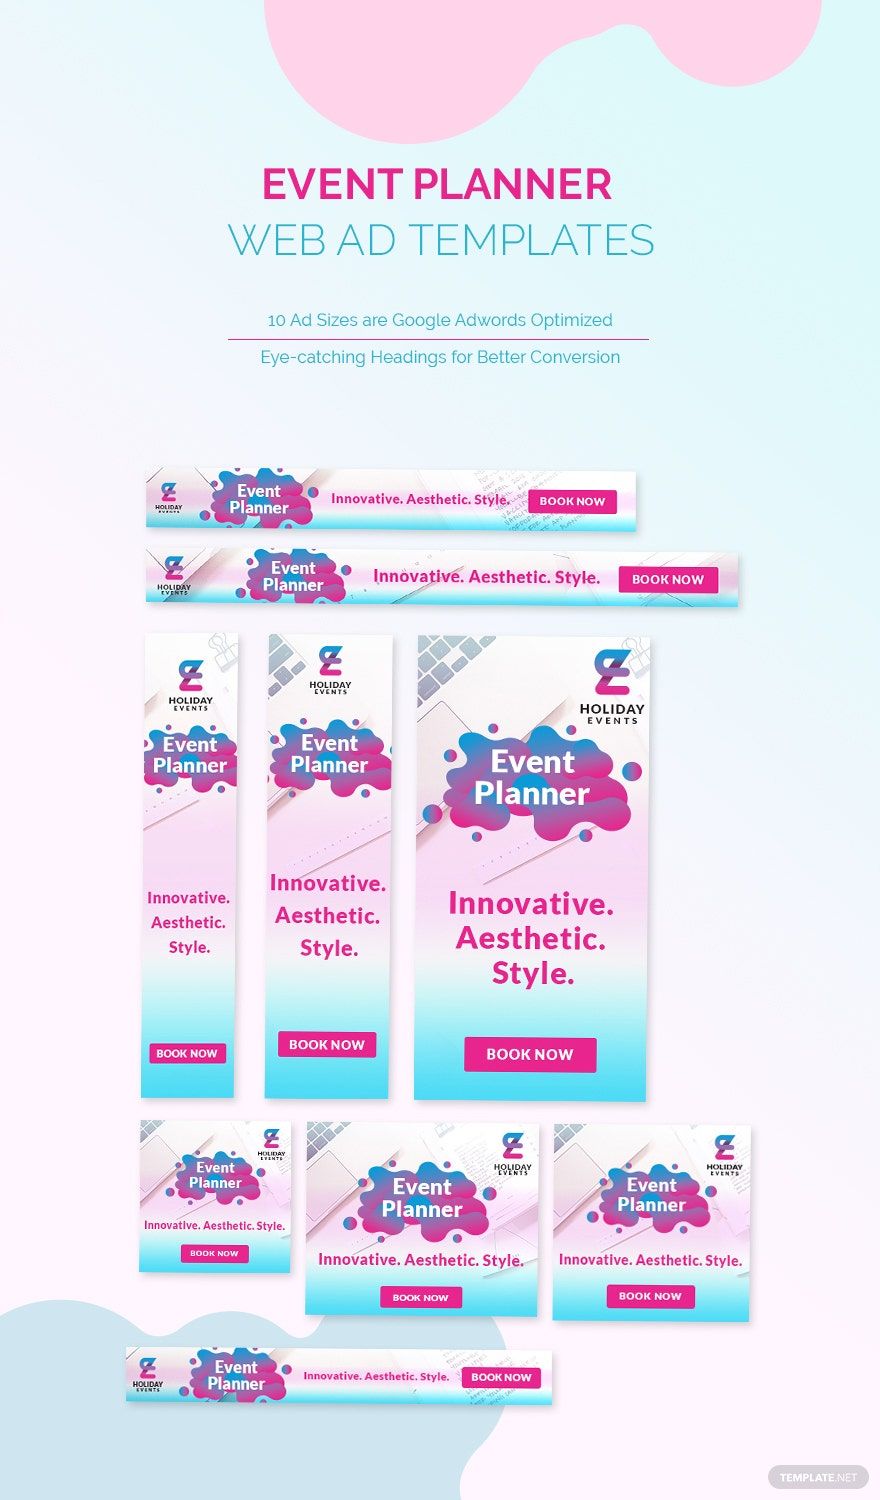 Event Planner Web Ad Template